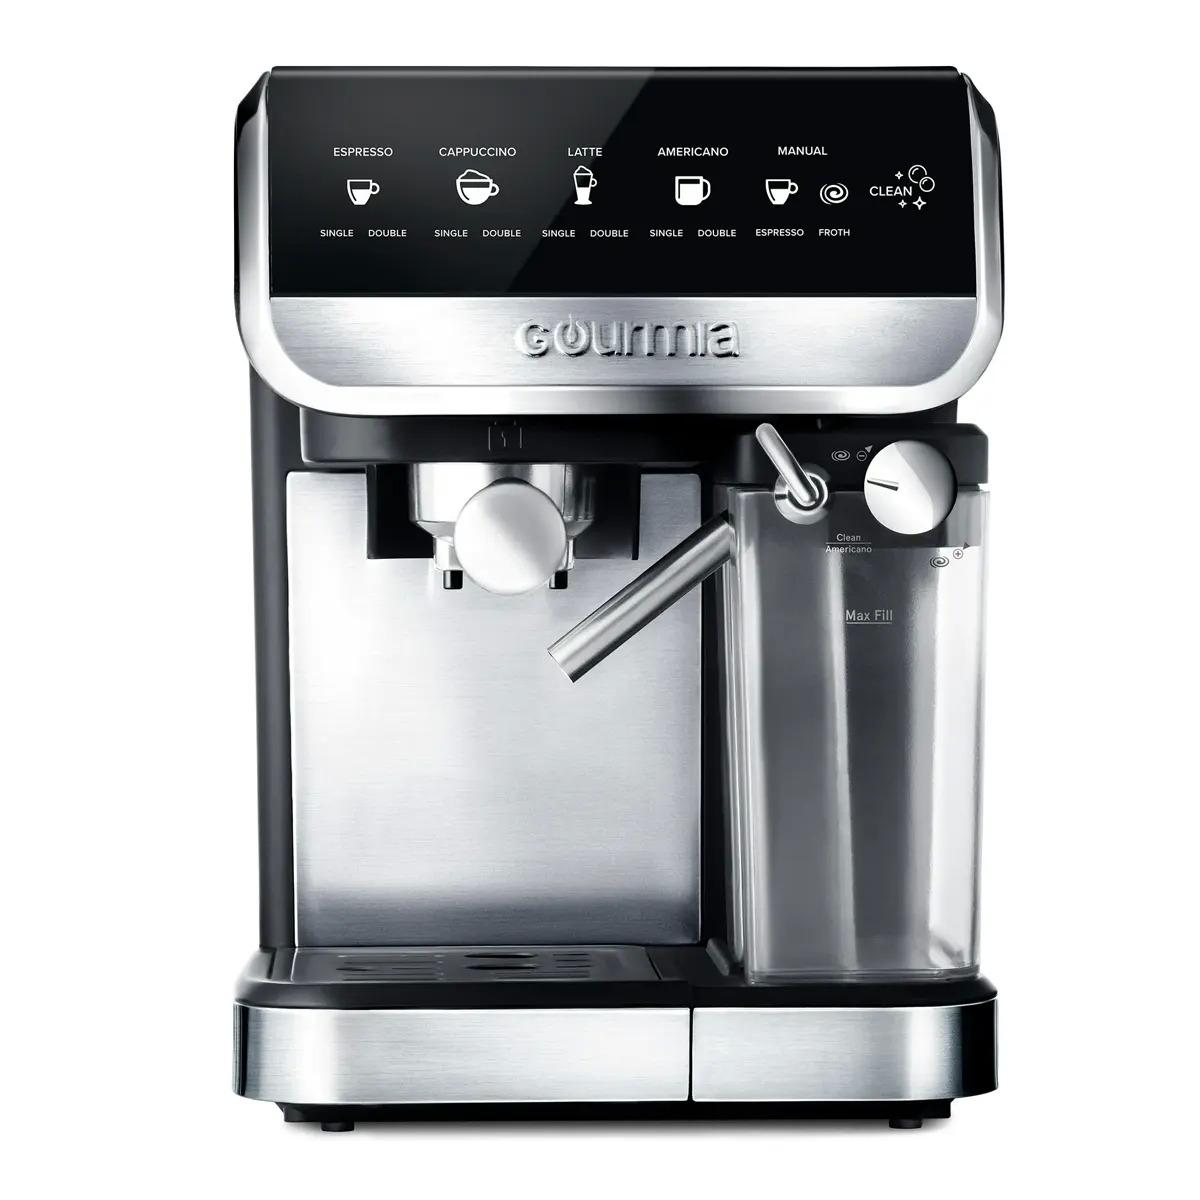 Gourmia Espresso Cappuccino Latte Maker with Frothing GCM4230 for $50 Shipped